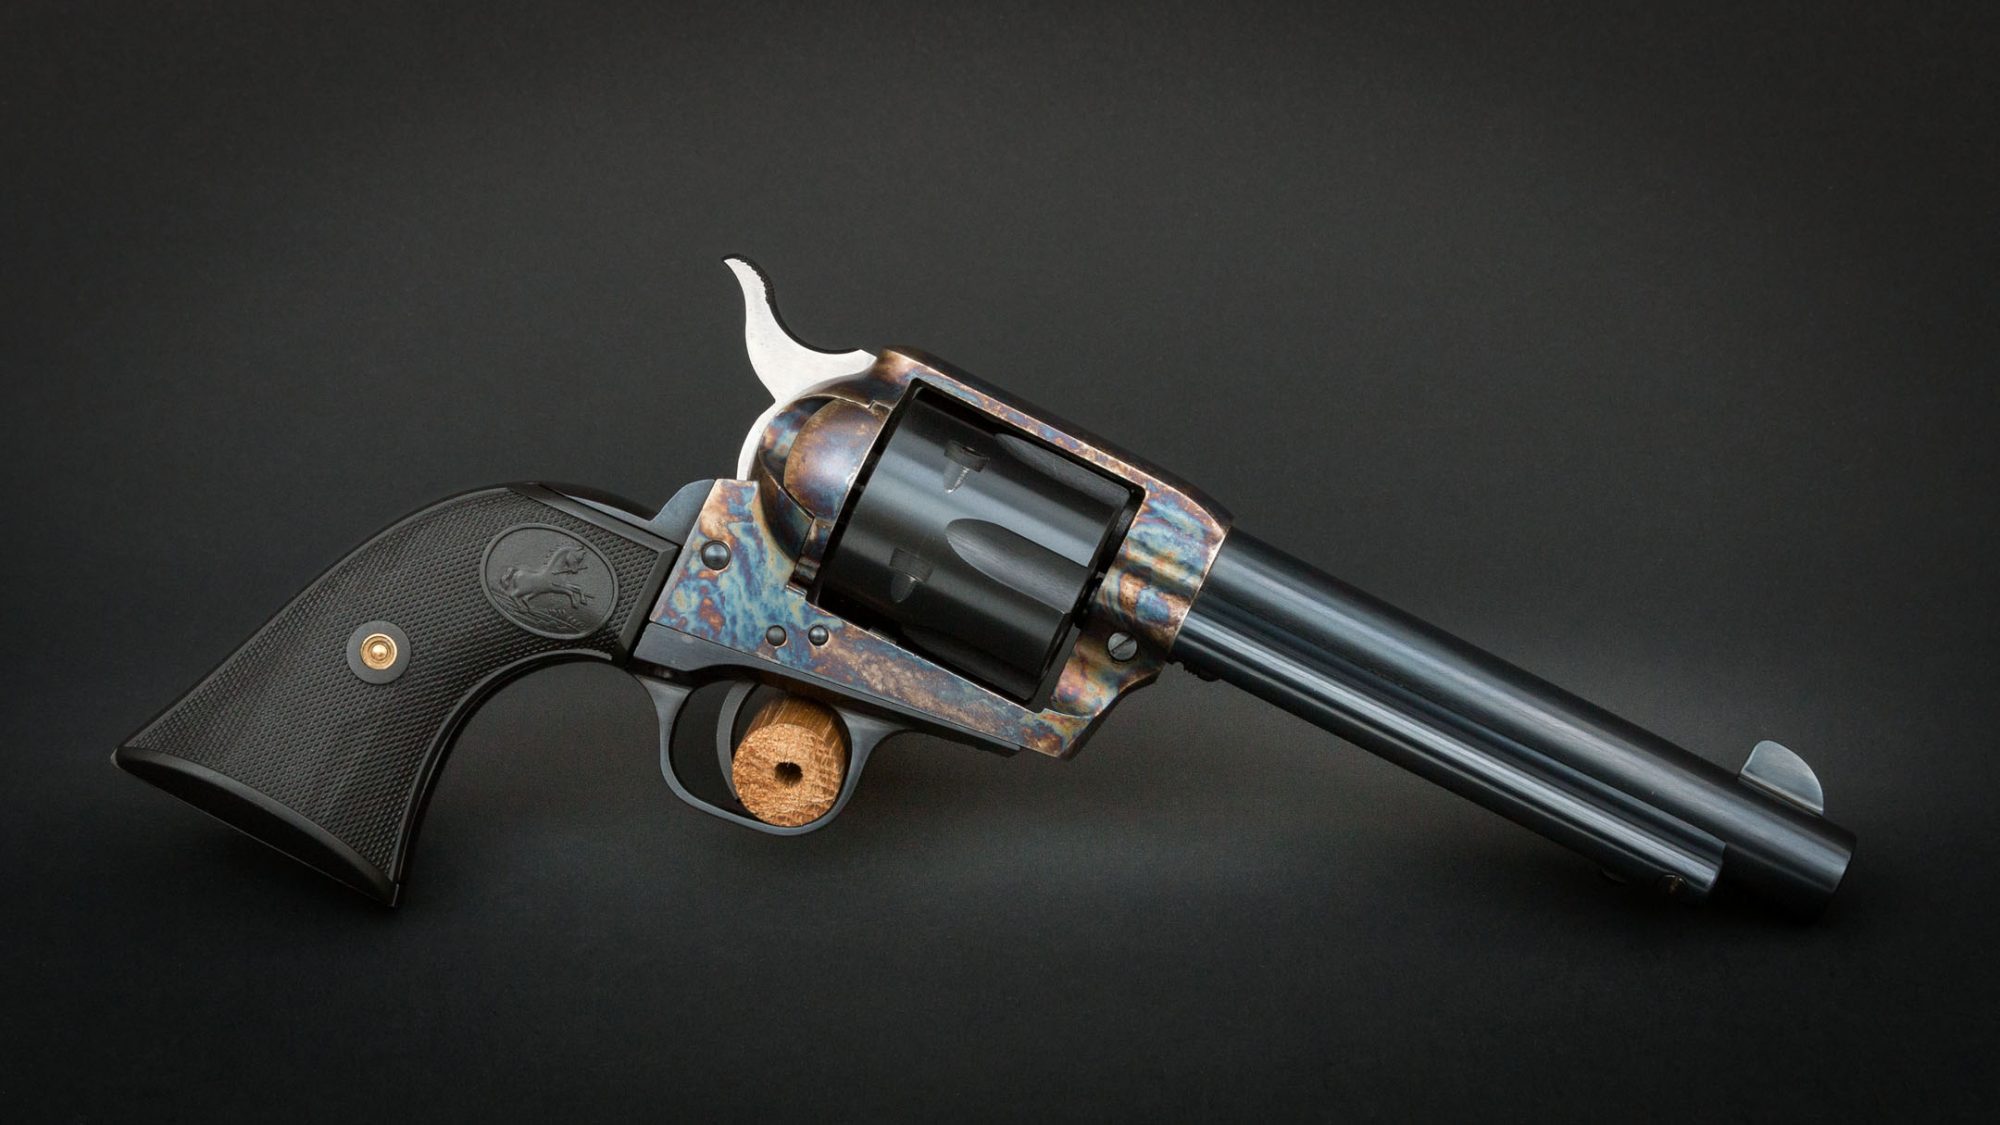 Colt Cowboy Single Action Revolver from 1999, for sale by Turnbull Restoration of Bloomfield, NY